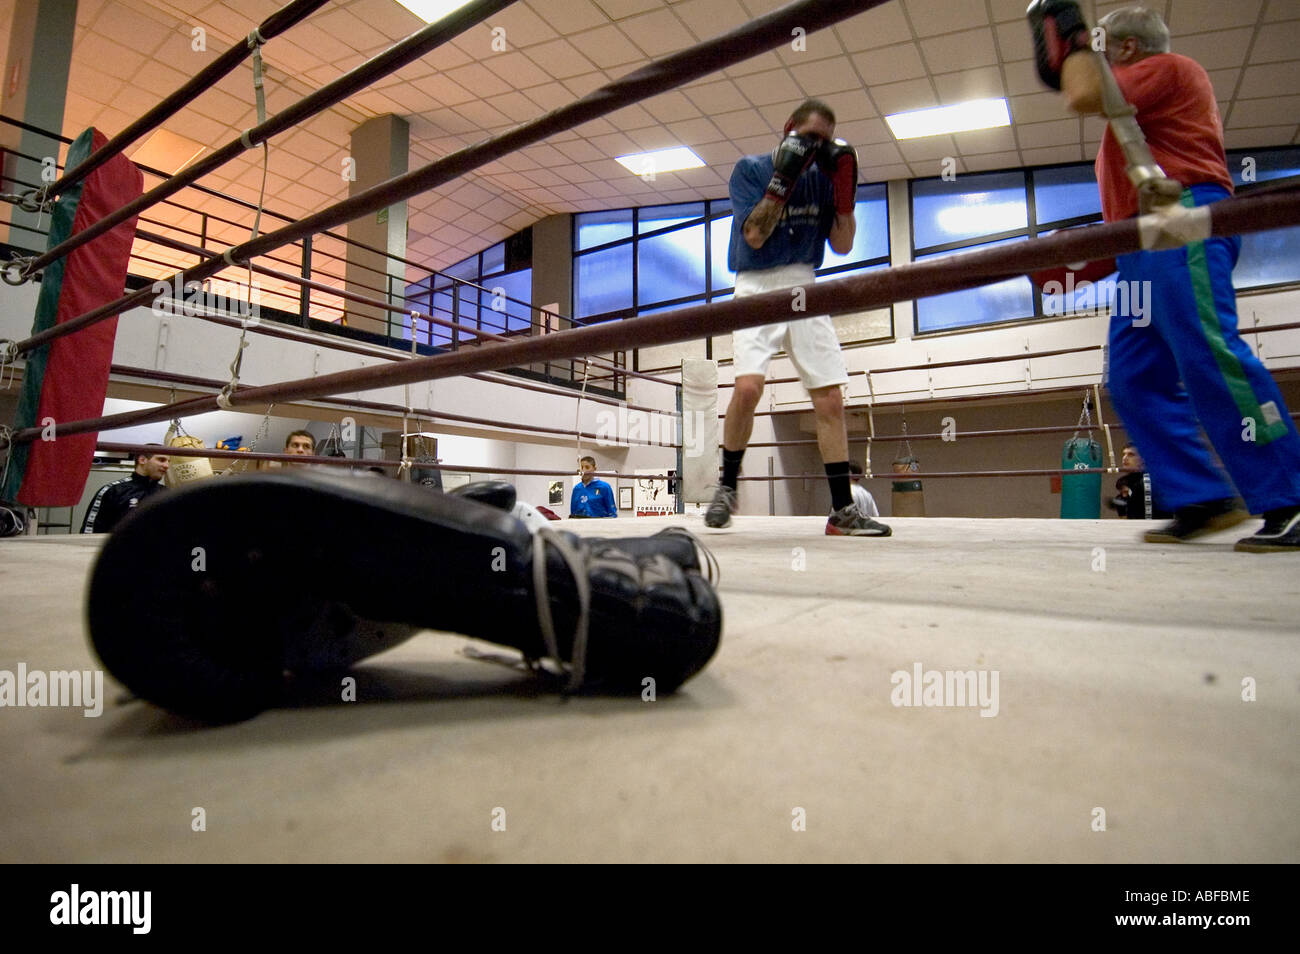 The boxing training in a gymnasium Stock Photo